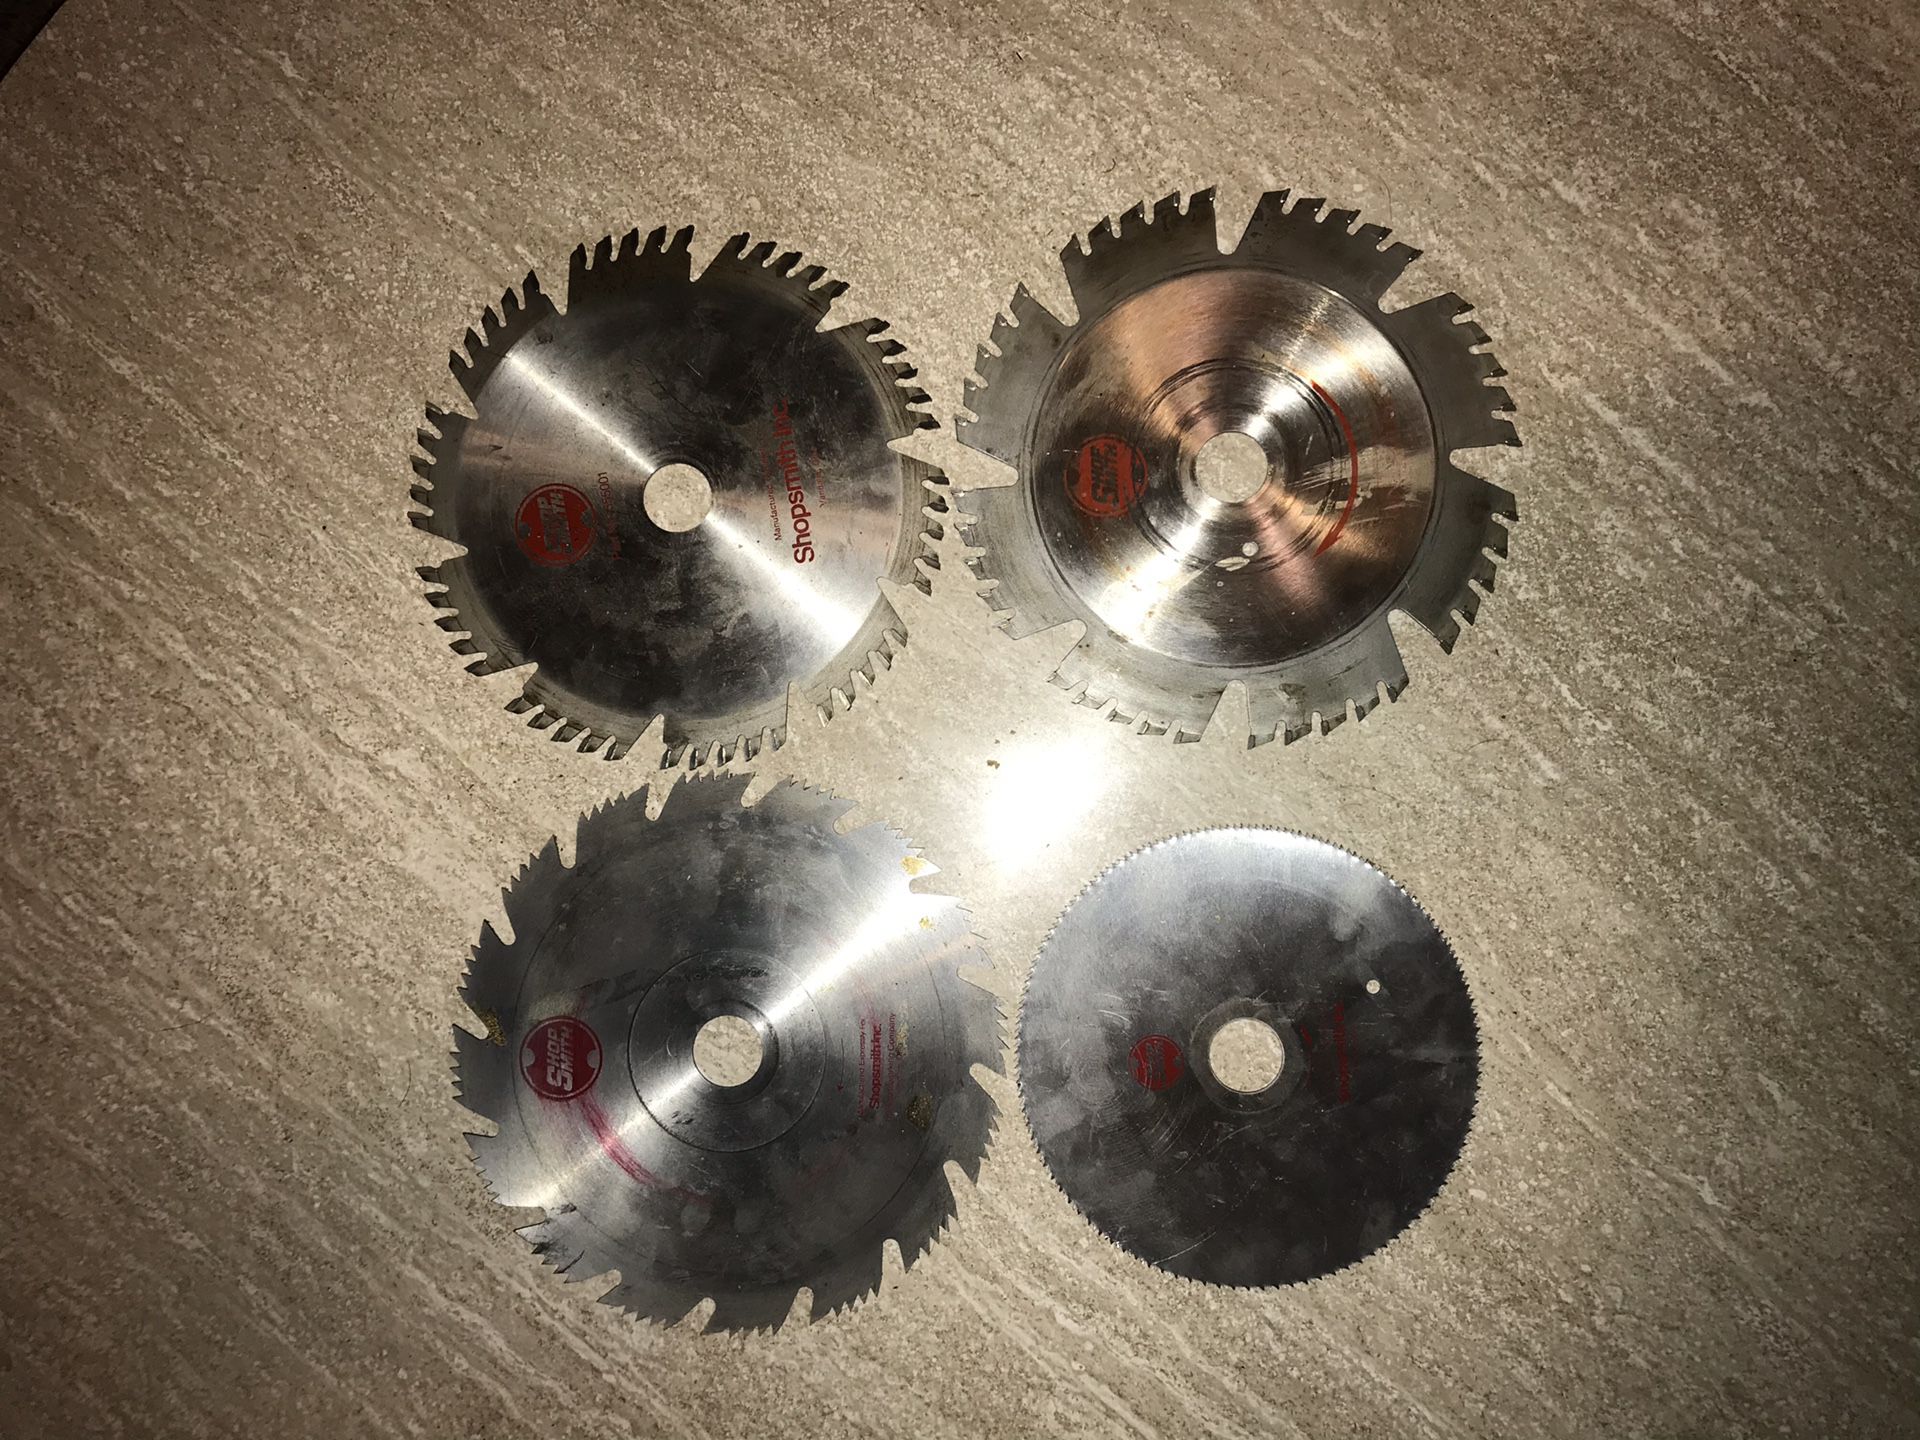 Lot of 4 Shopsmith table saw blades